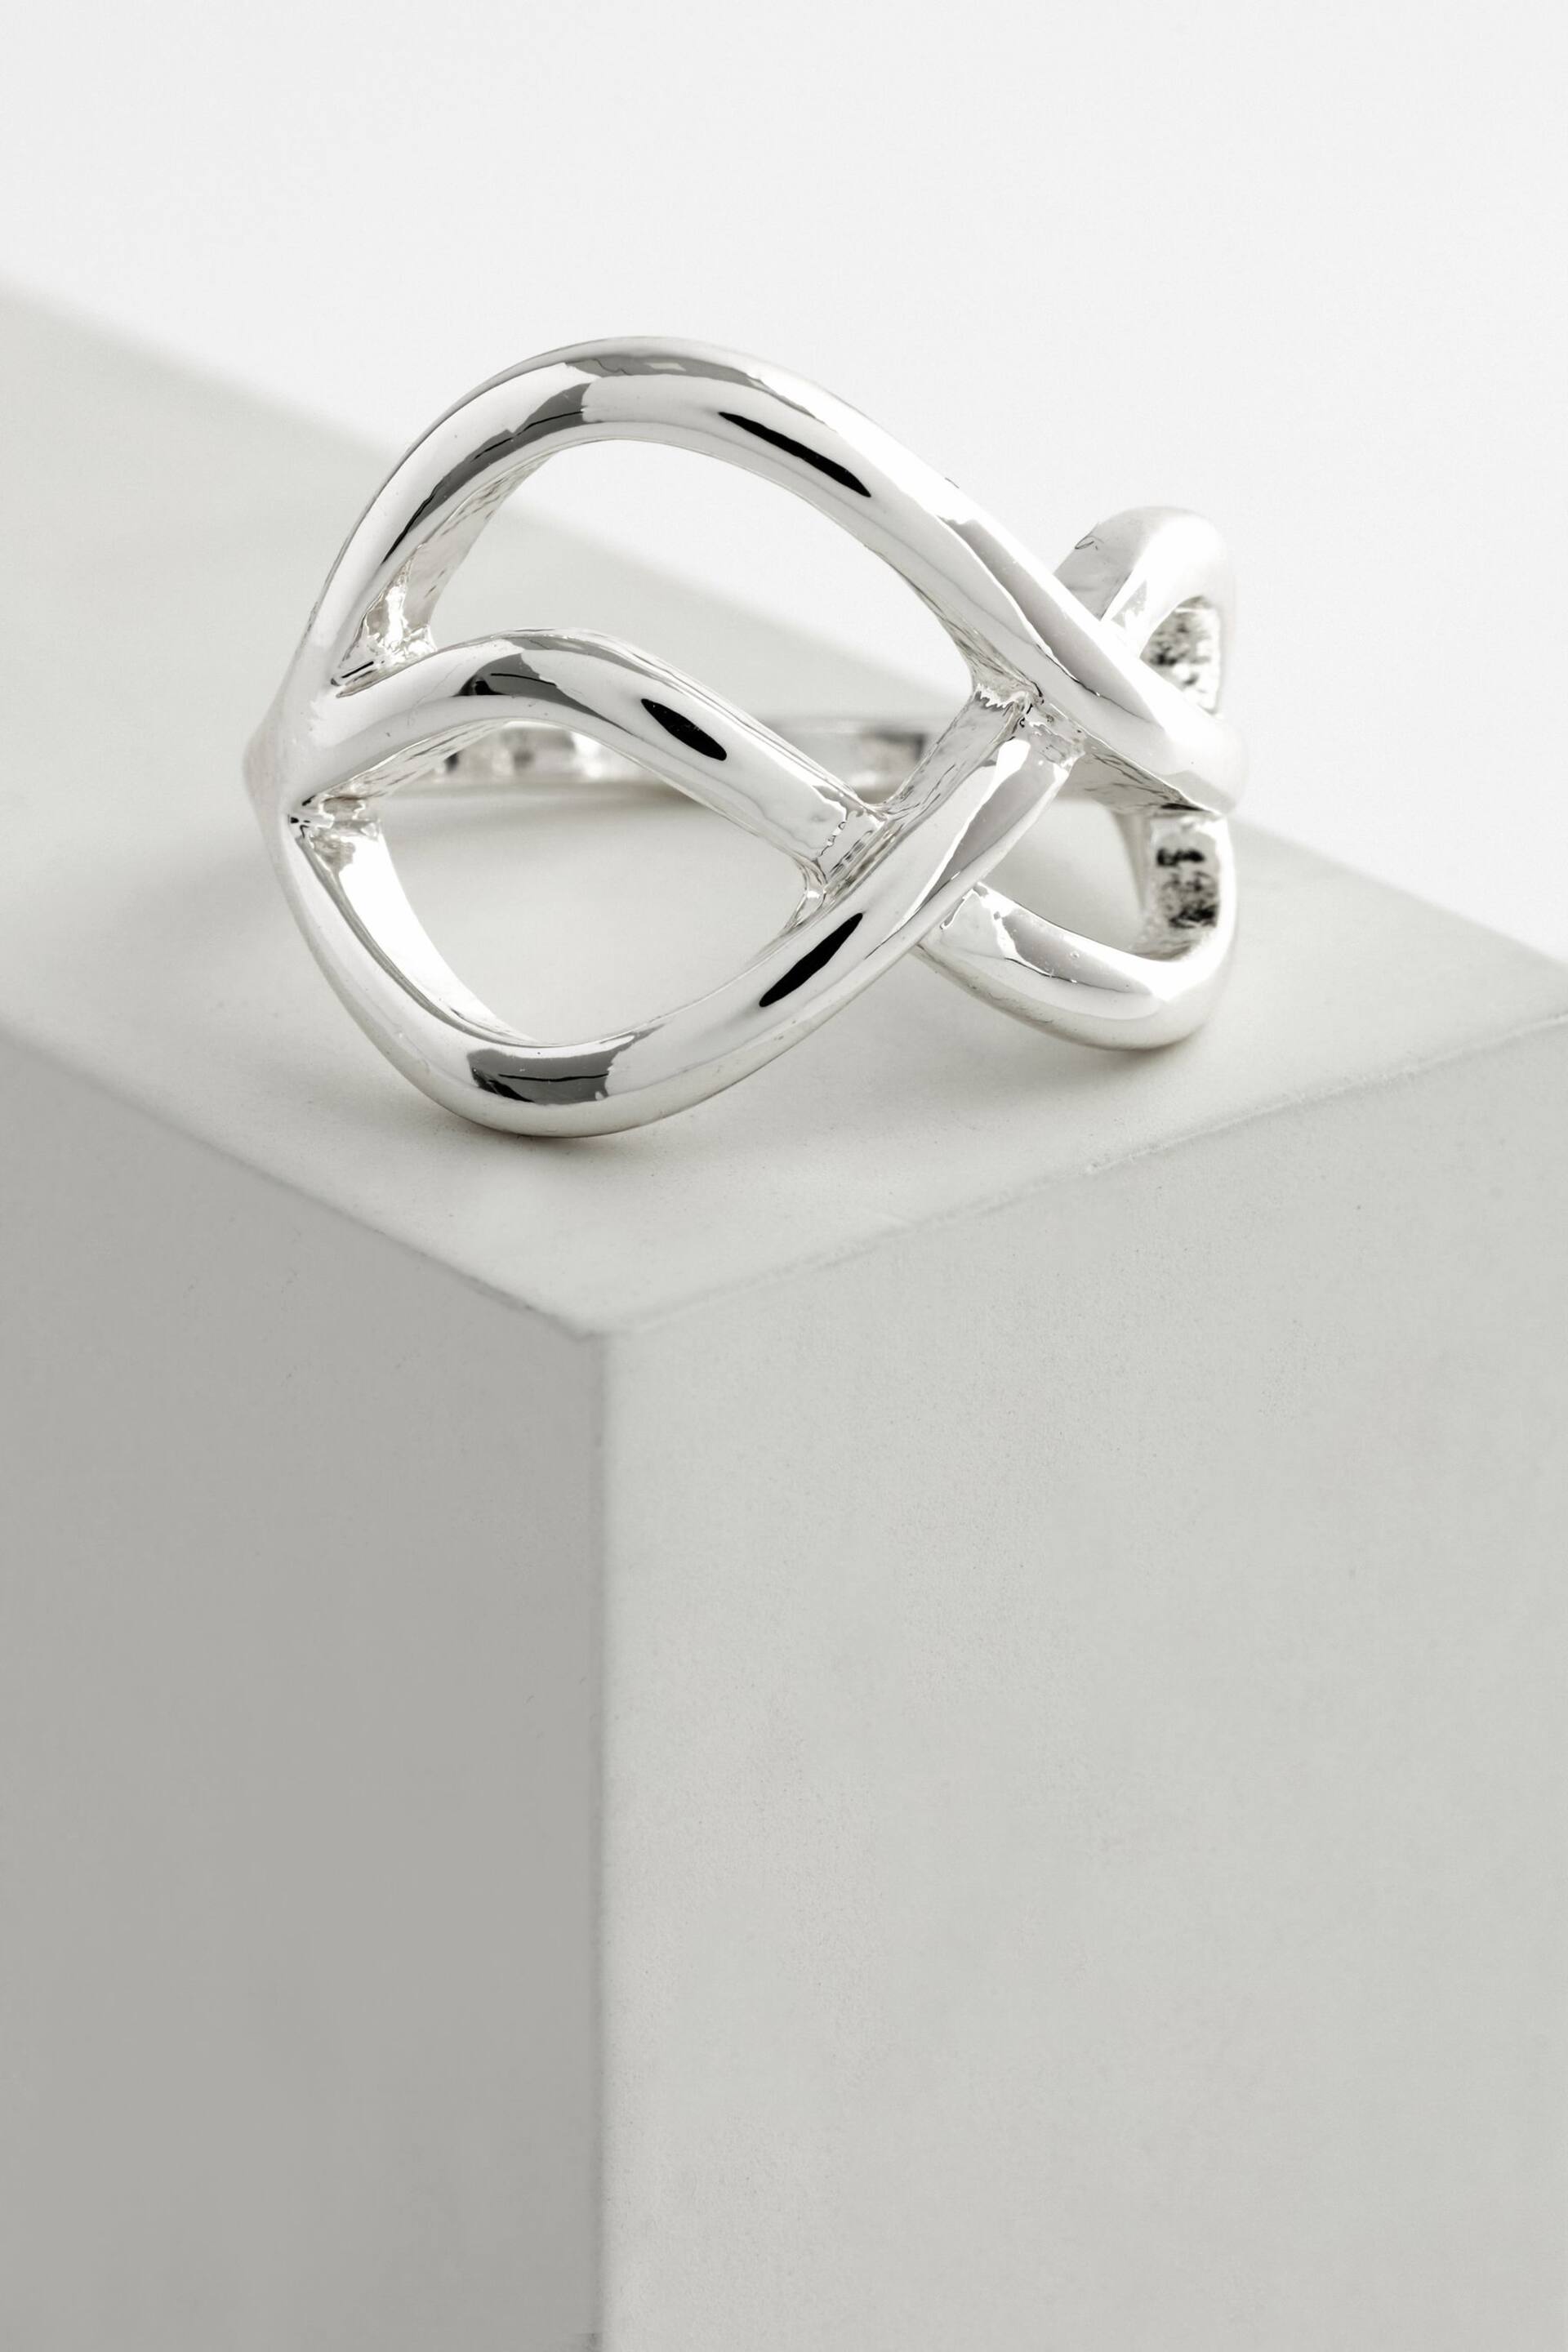 Silver Tone Twist Ring Made with Recycled Metal - Image 3 of 3